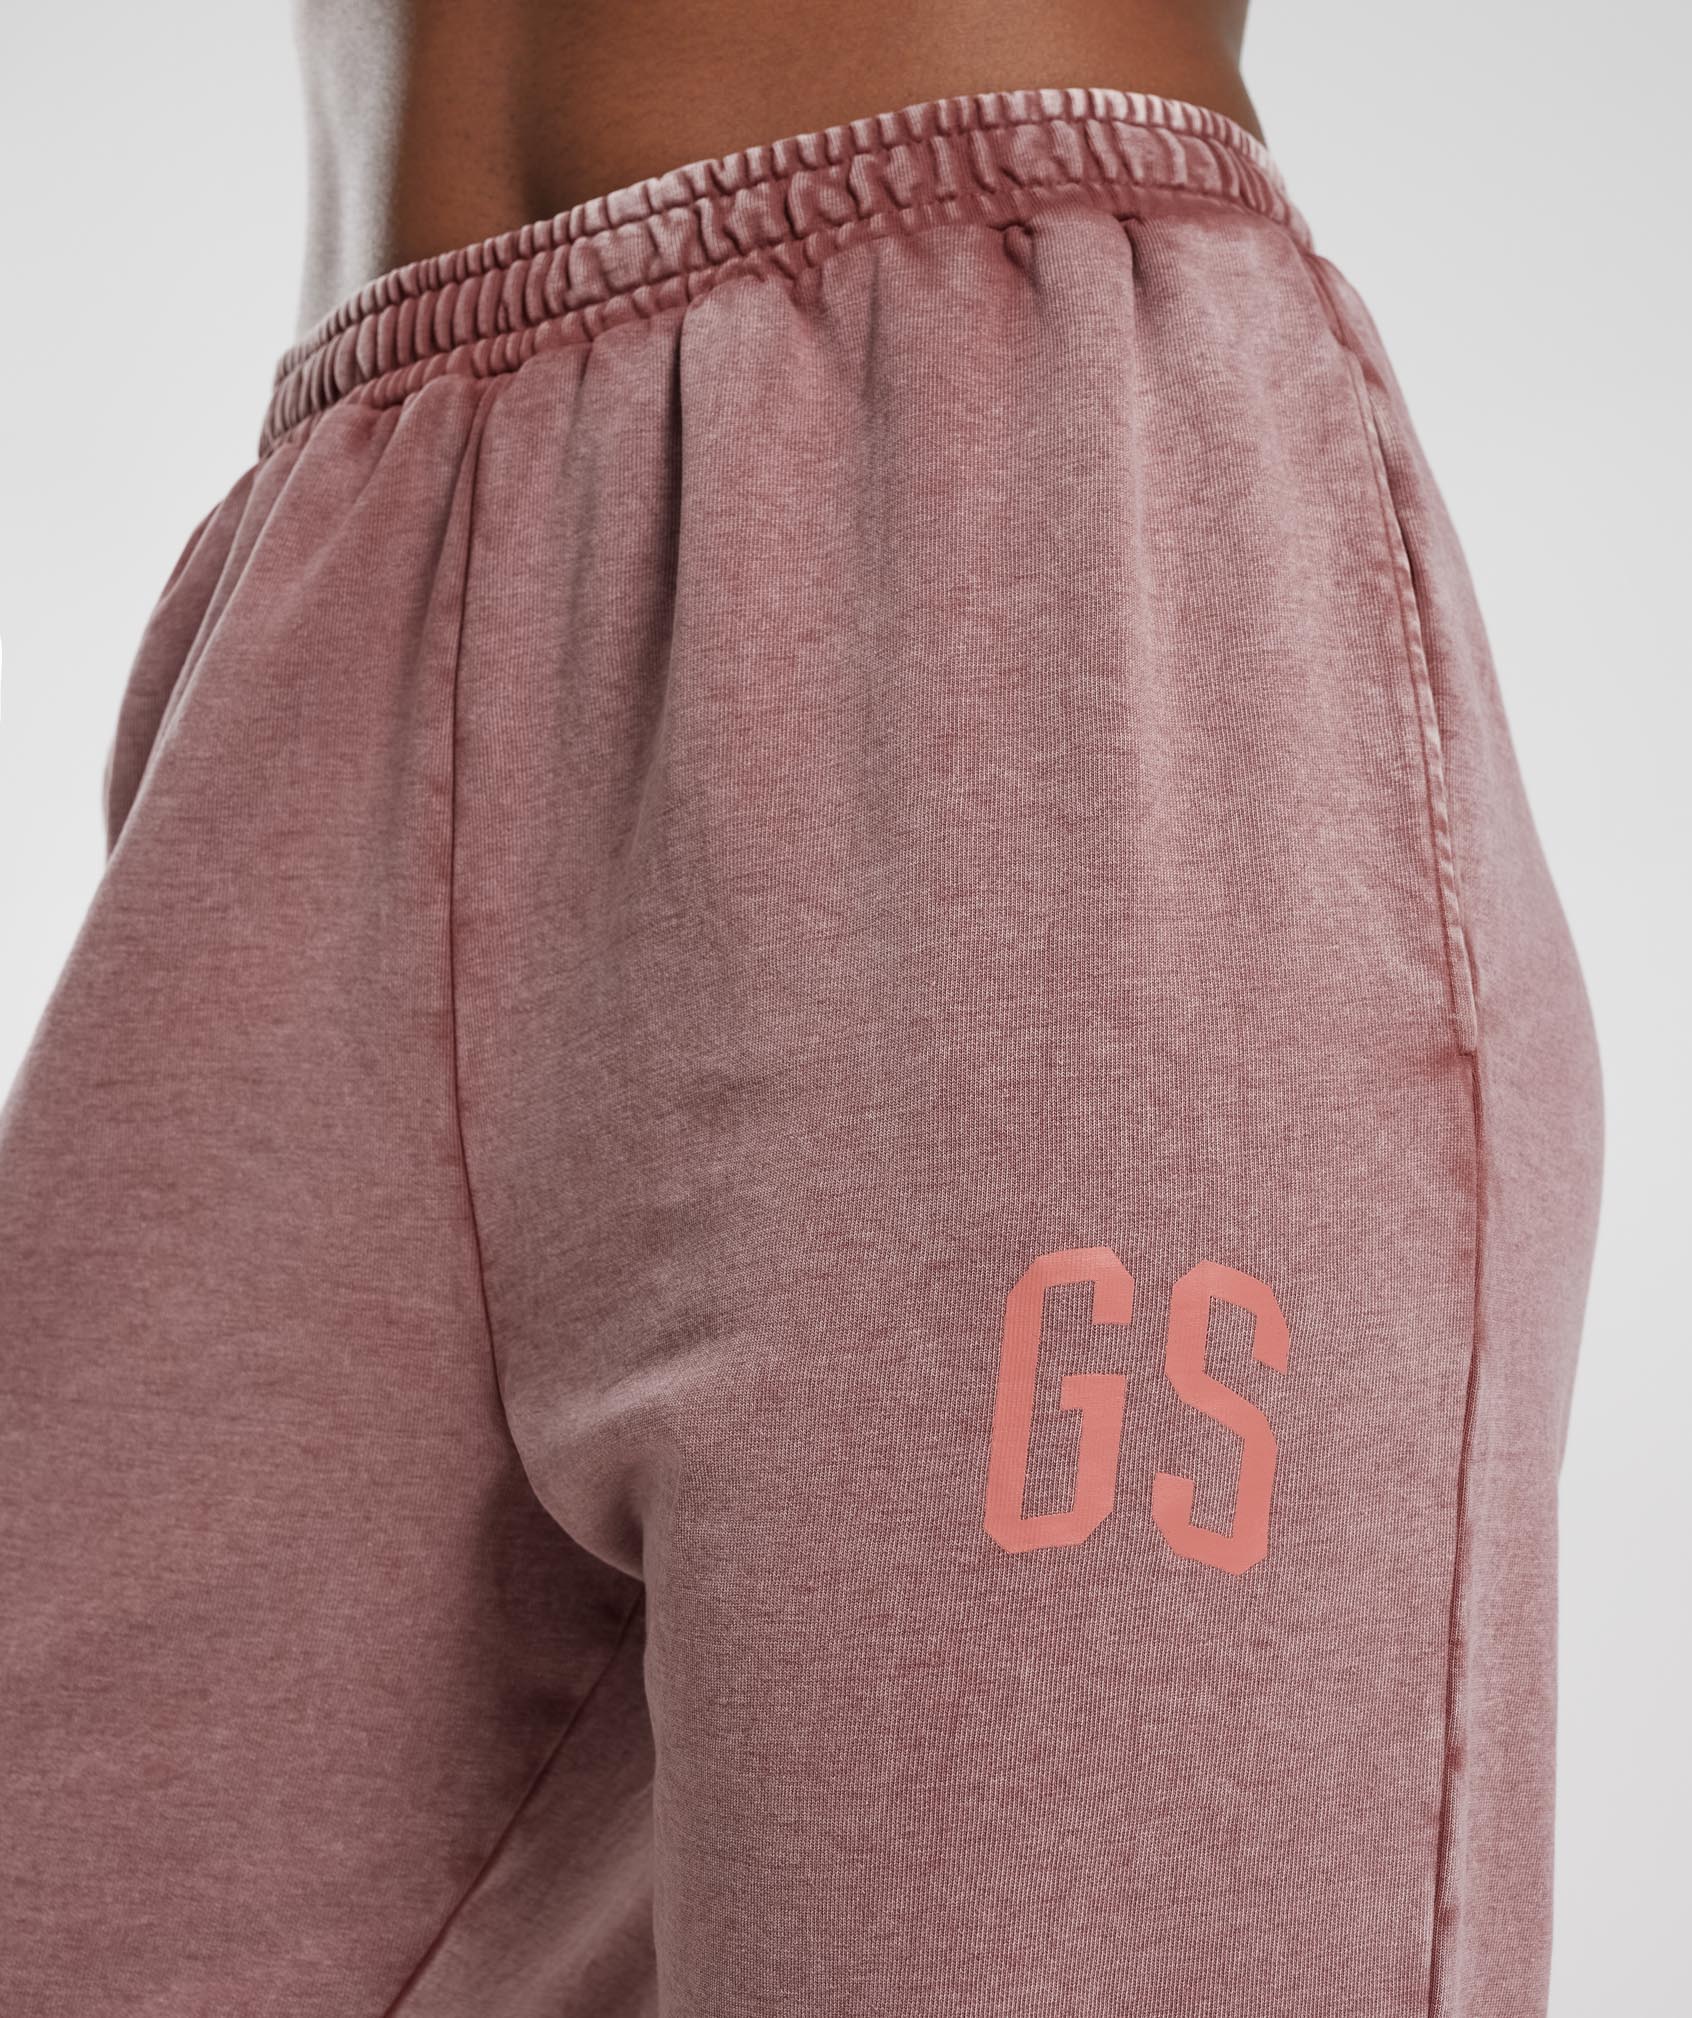 Collegiate Joggers in Dusty Maroon - view 5